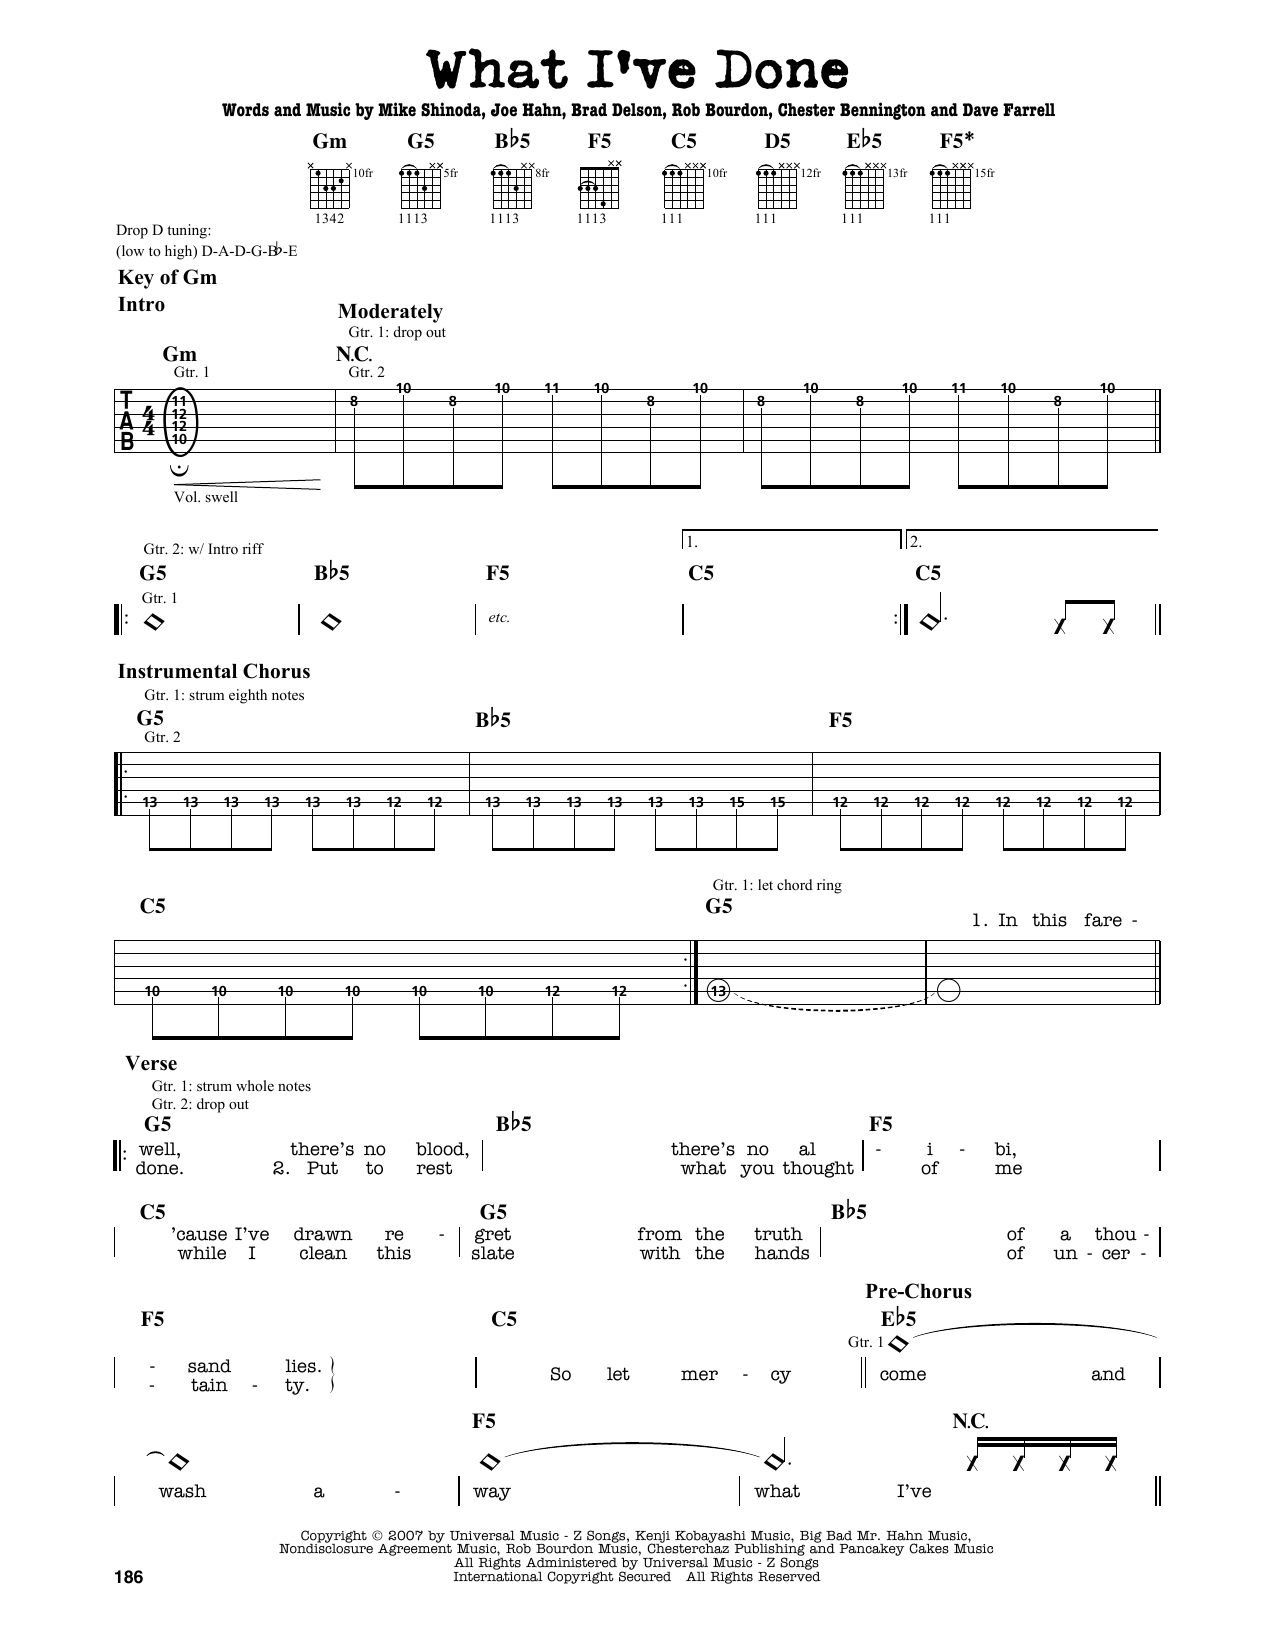 Download Linkin Park What I've Done Sheet Music